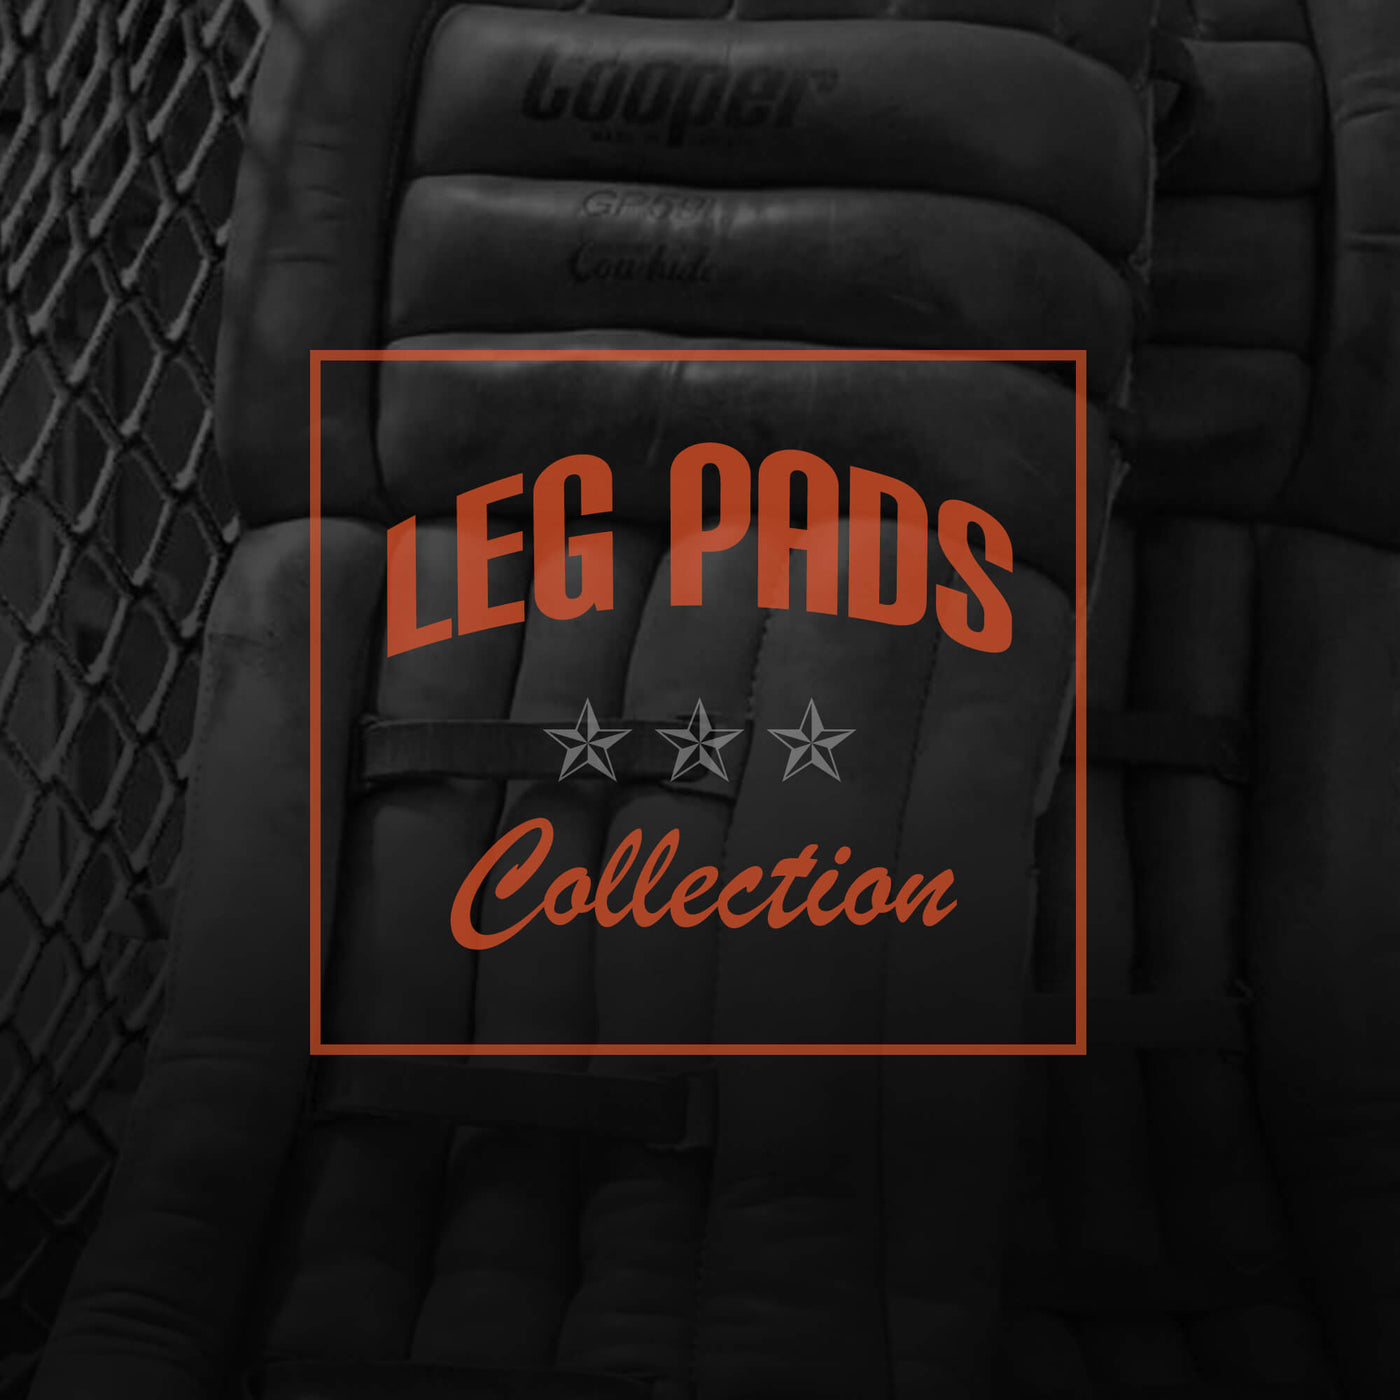 Leg Pads Collection